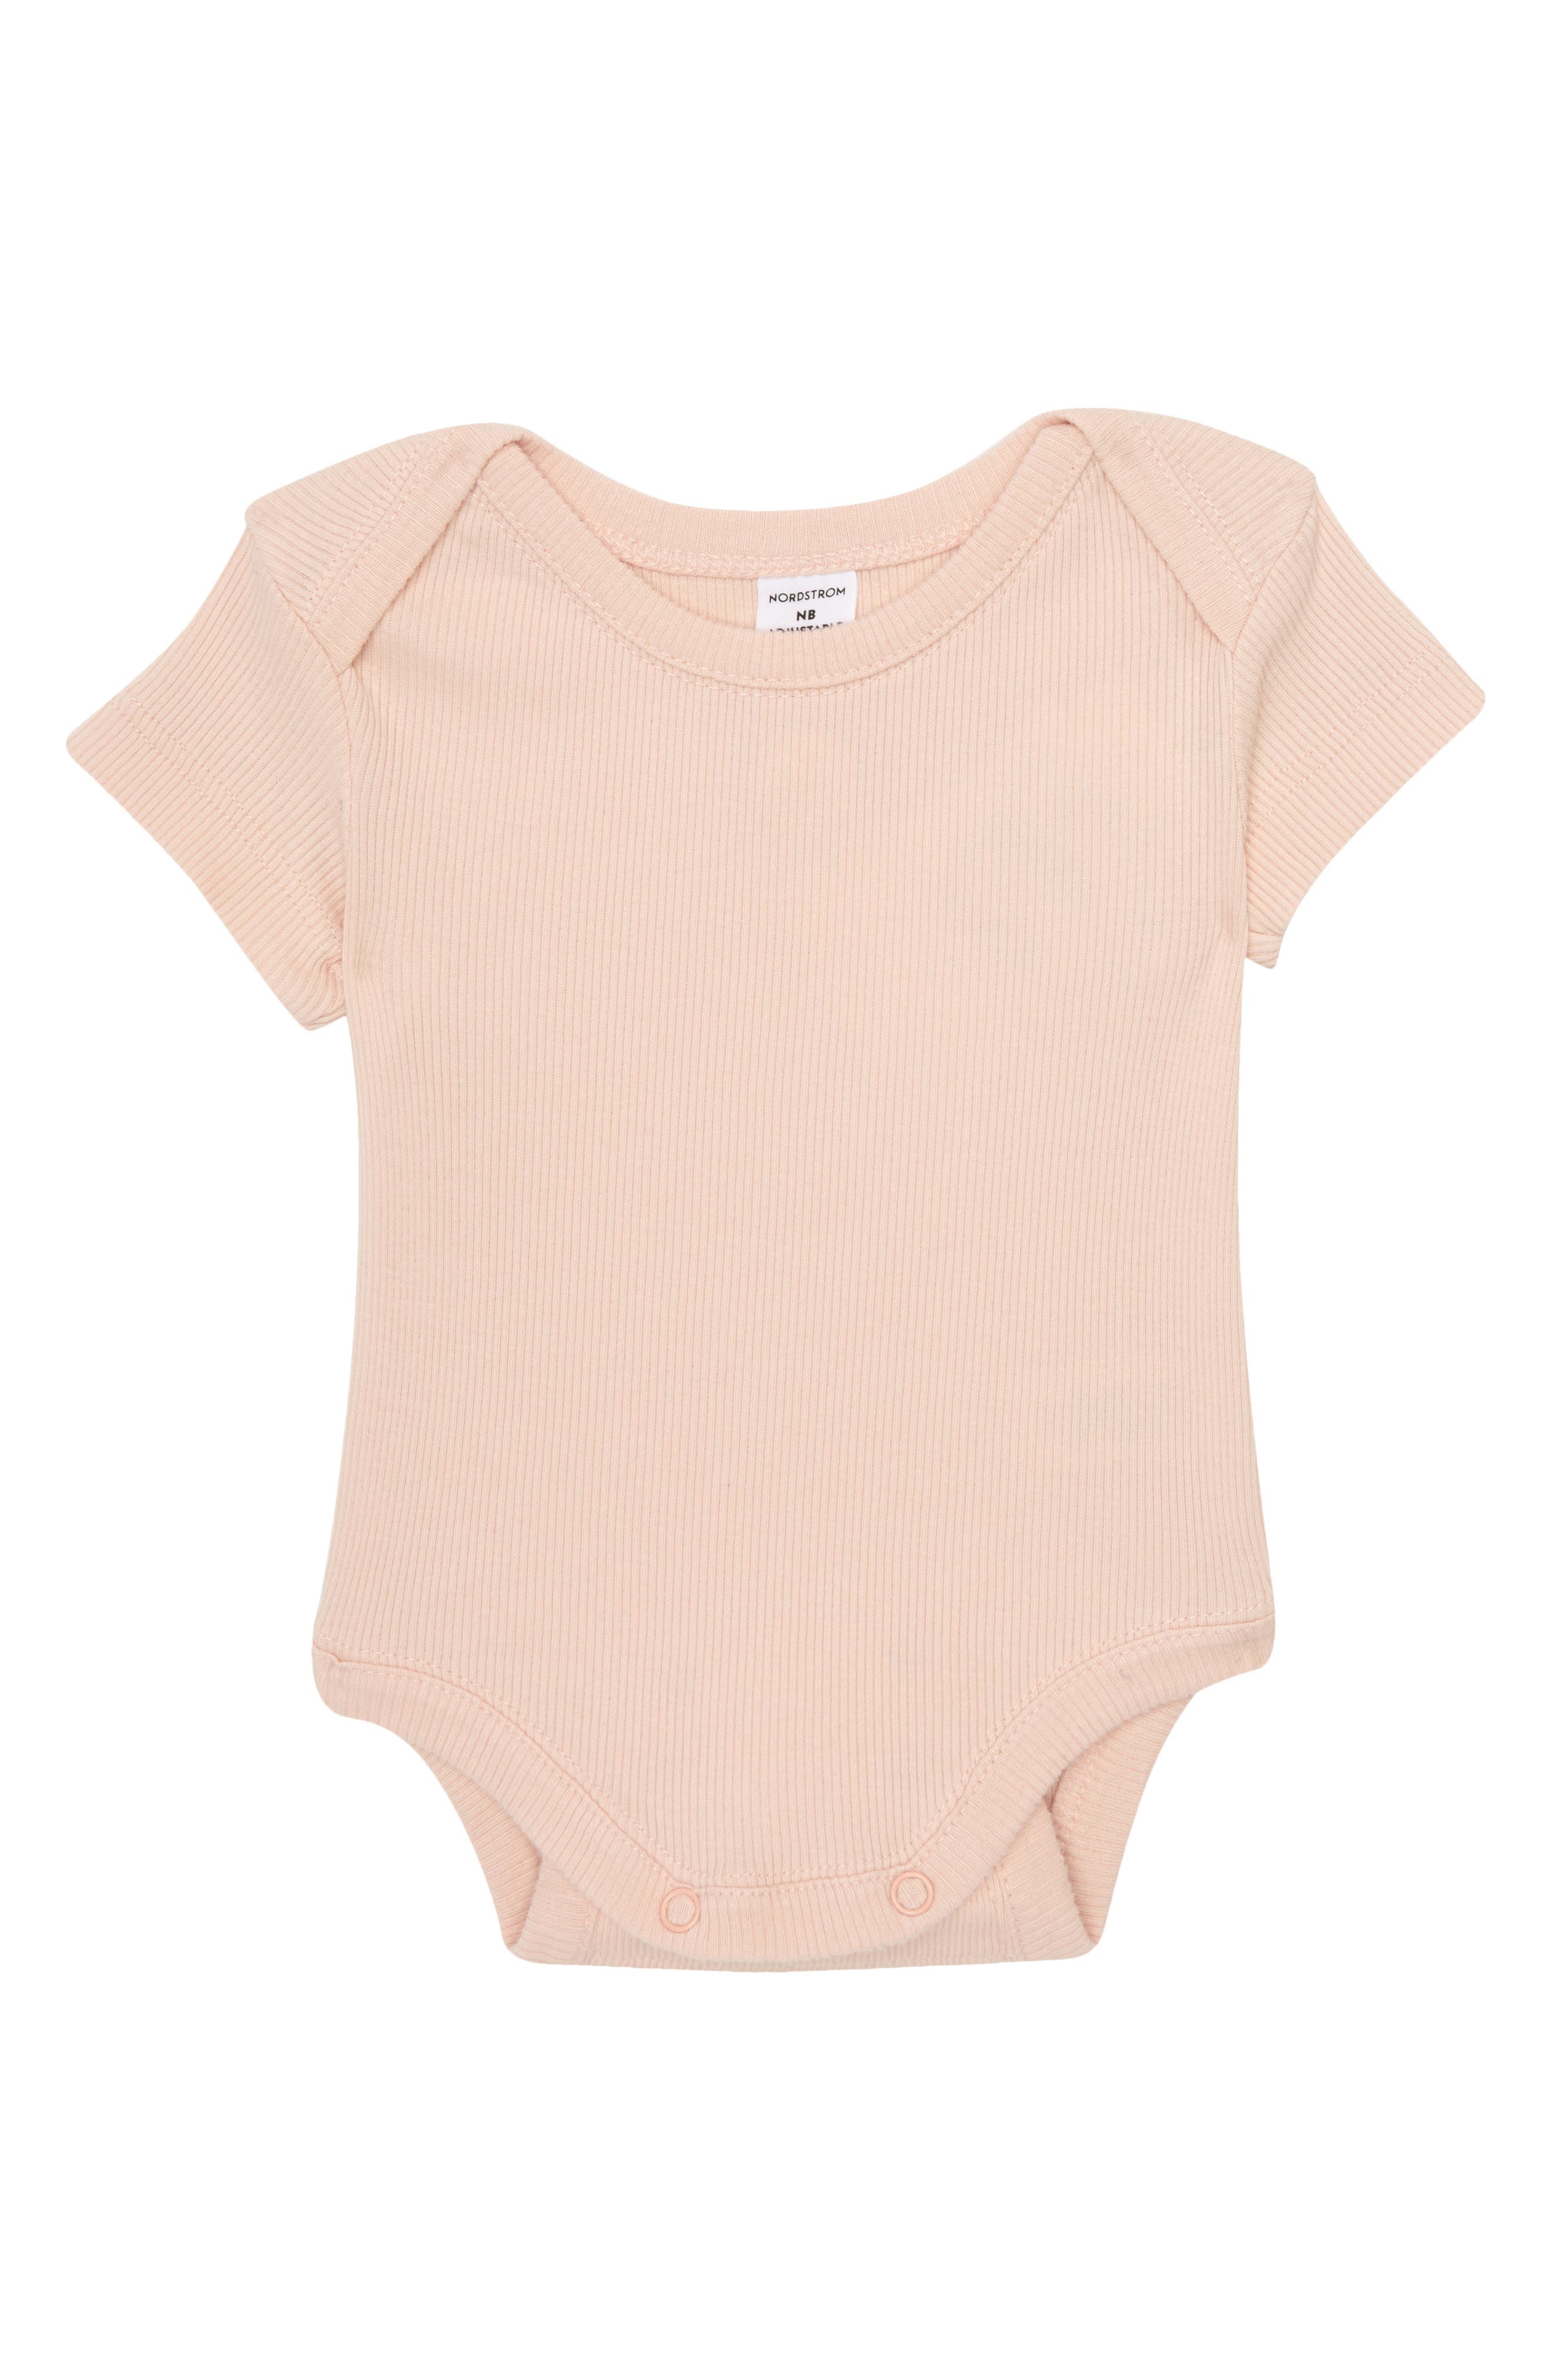 Baby Girls Dusty Pink Bear Top and Trousers Outfit Nutmeg NEW